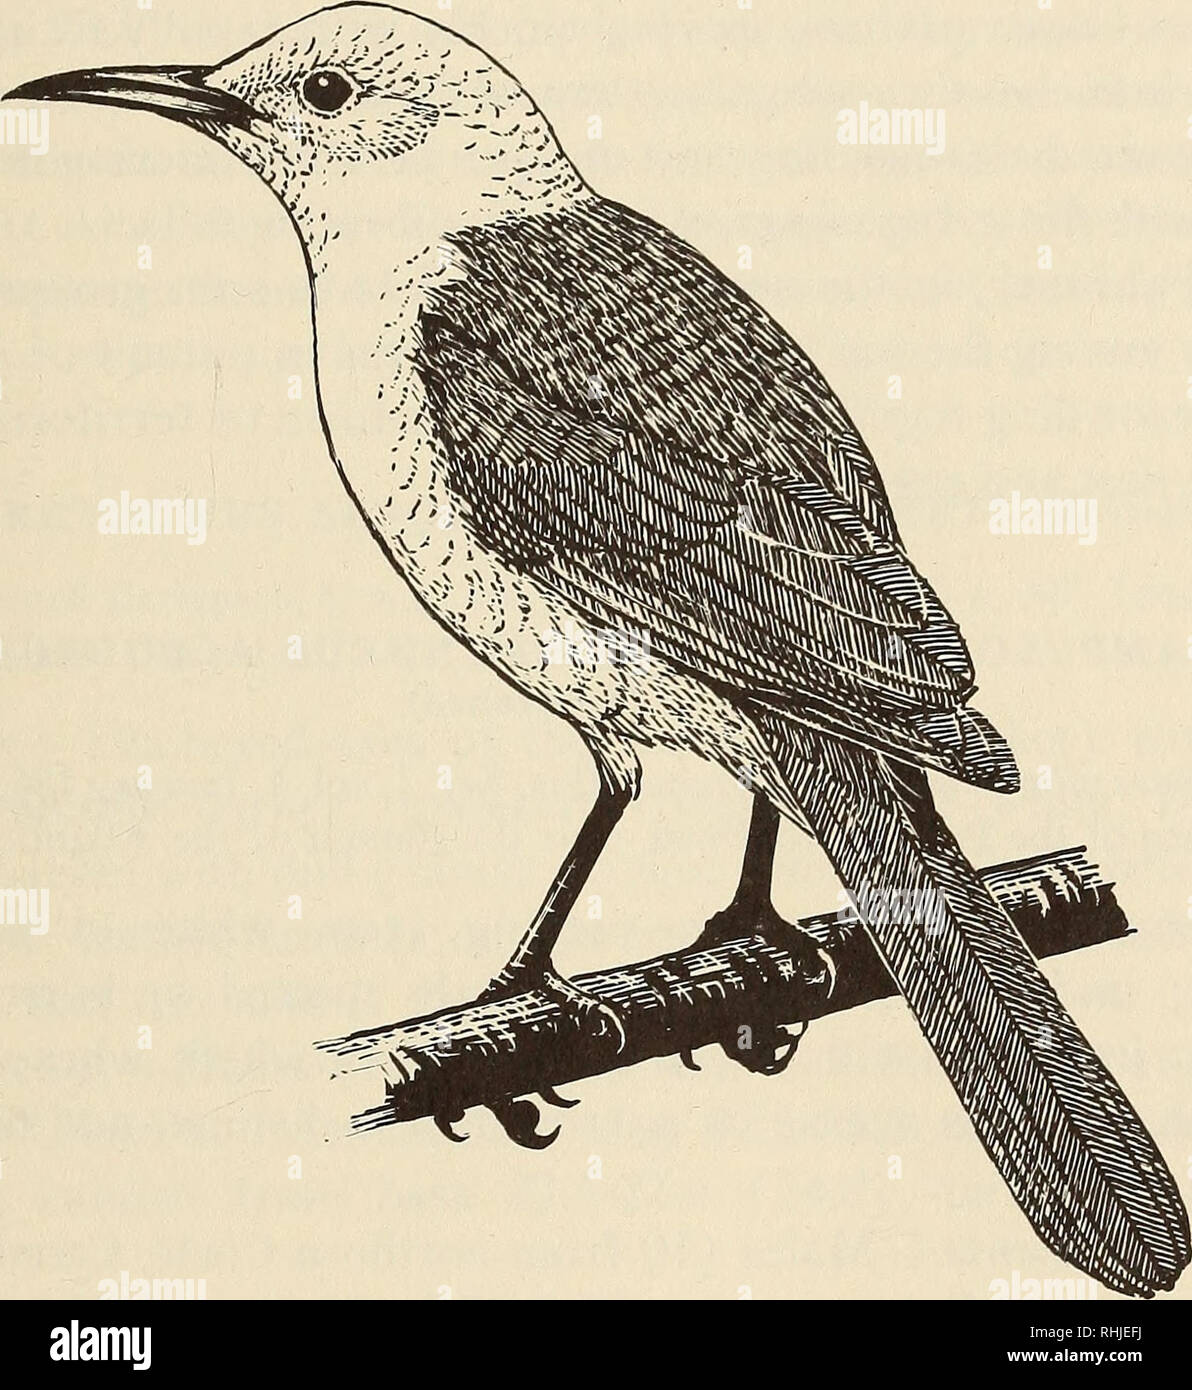 . The birds of the Republic of Panama. Birds. FAMILY TROGLODYTIDAE 61 rate species from C. turdinus and its races, all of which differ in adult stage in variable patterns of dark markings on the head and undersur- face. A record by Salvin and Godman (Biol. Centr. Amer., Aves, vol. 1, 1880, p. 63) under the name &quot;albibrunneus&quot; from &quot;Veraguas (Arce)&quot; quoted by other authors, is in error, as the species is not known from that area.. Figure 8.—White-headed Wren, Cucarachero Cabeciblanco, Campylorhynchus albobrunneus. This handsome wren is an arboreal forest inhabitant that rang Stock Photo